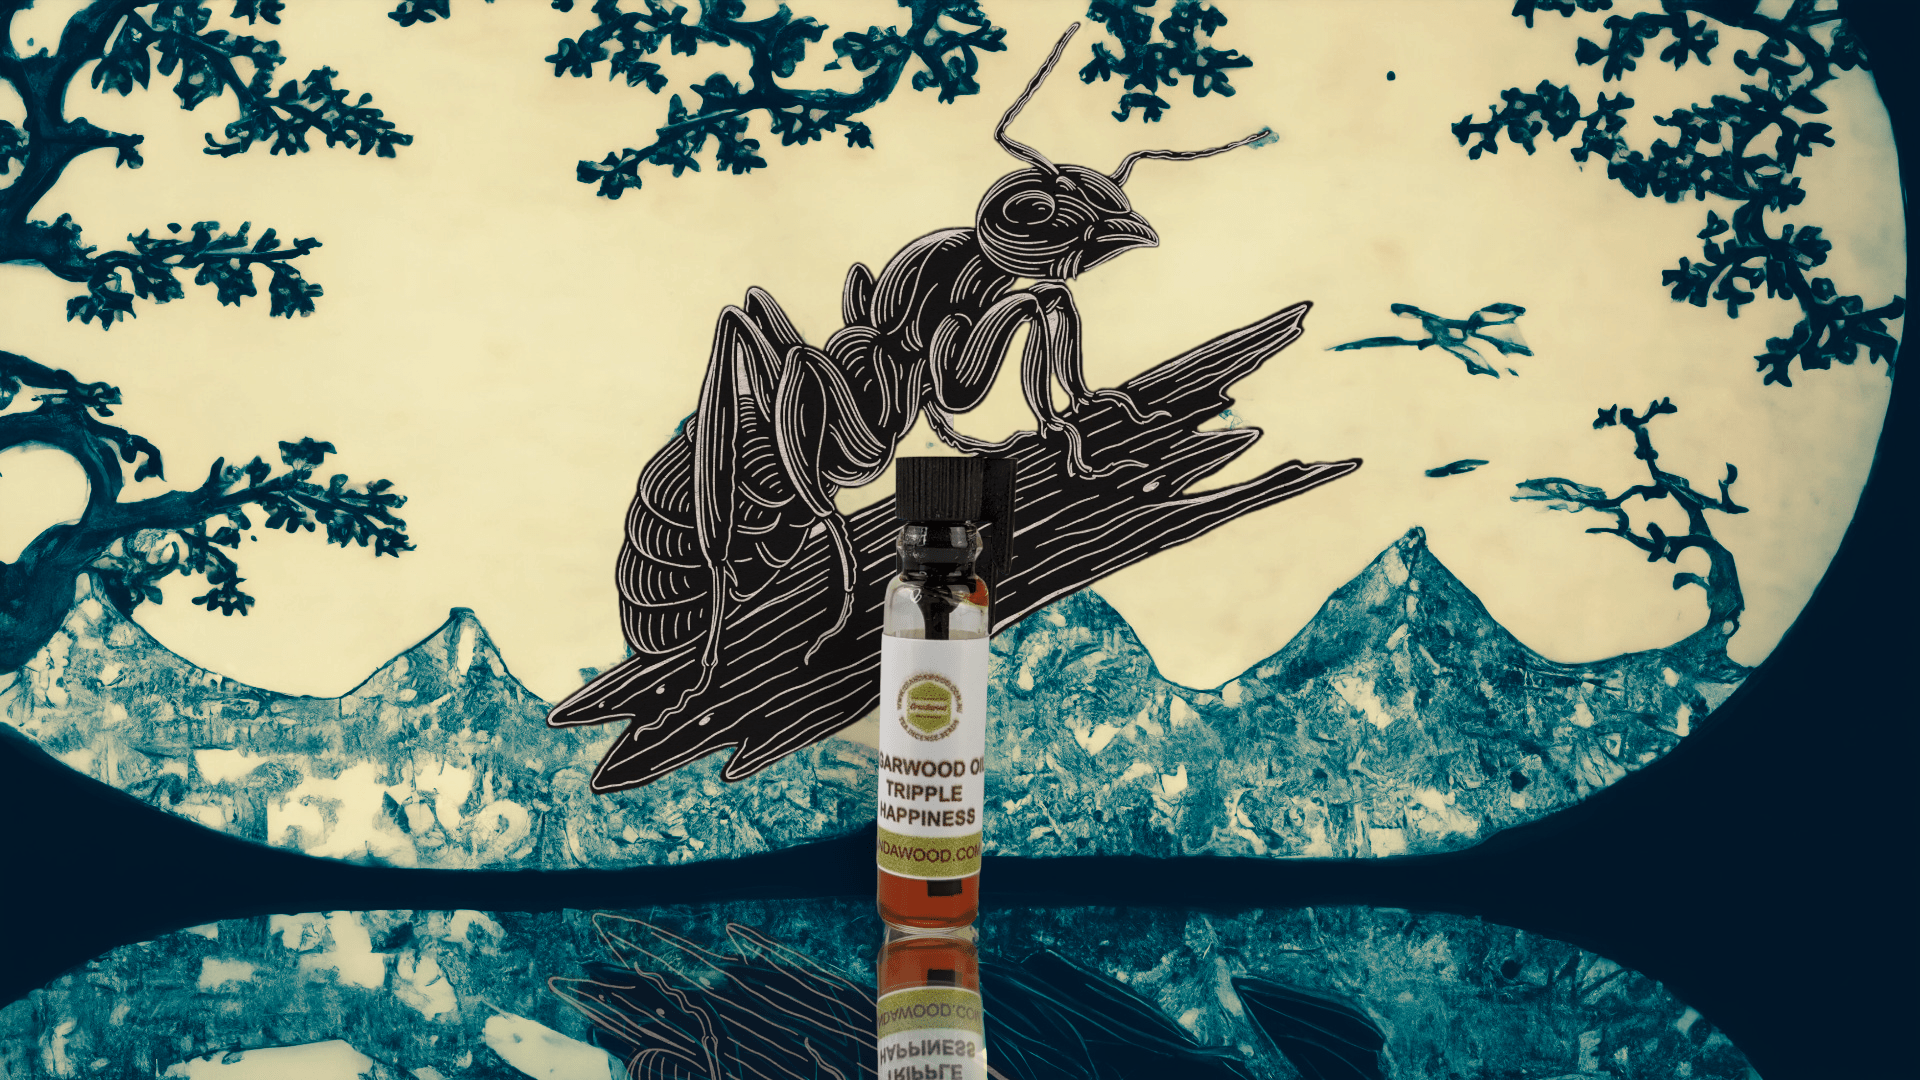 *New* The Heaven Smoke- 100% Pure Cutlivated Agarwood Oil (Oud)- Co2 Supercritical Fluid Extraction - Triple Happiness- Wild Agarwood / 0.5g